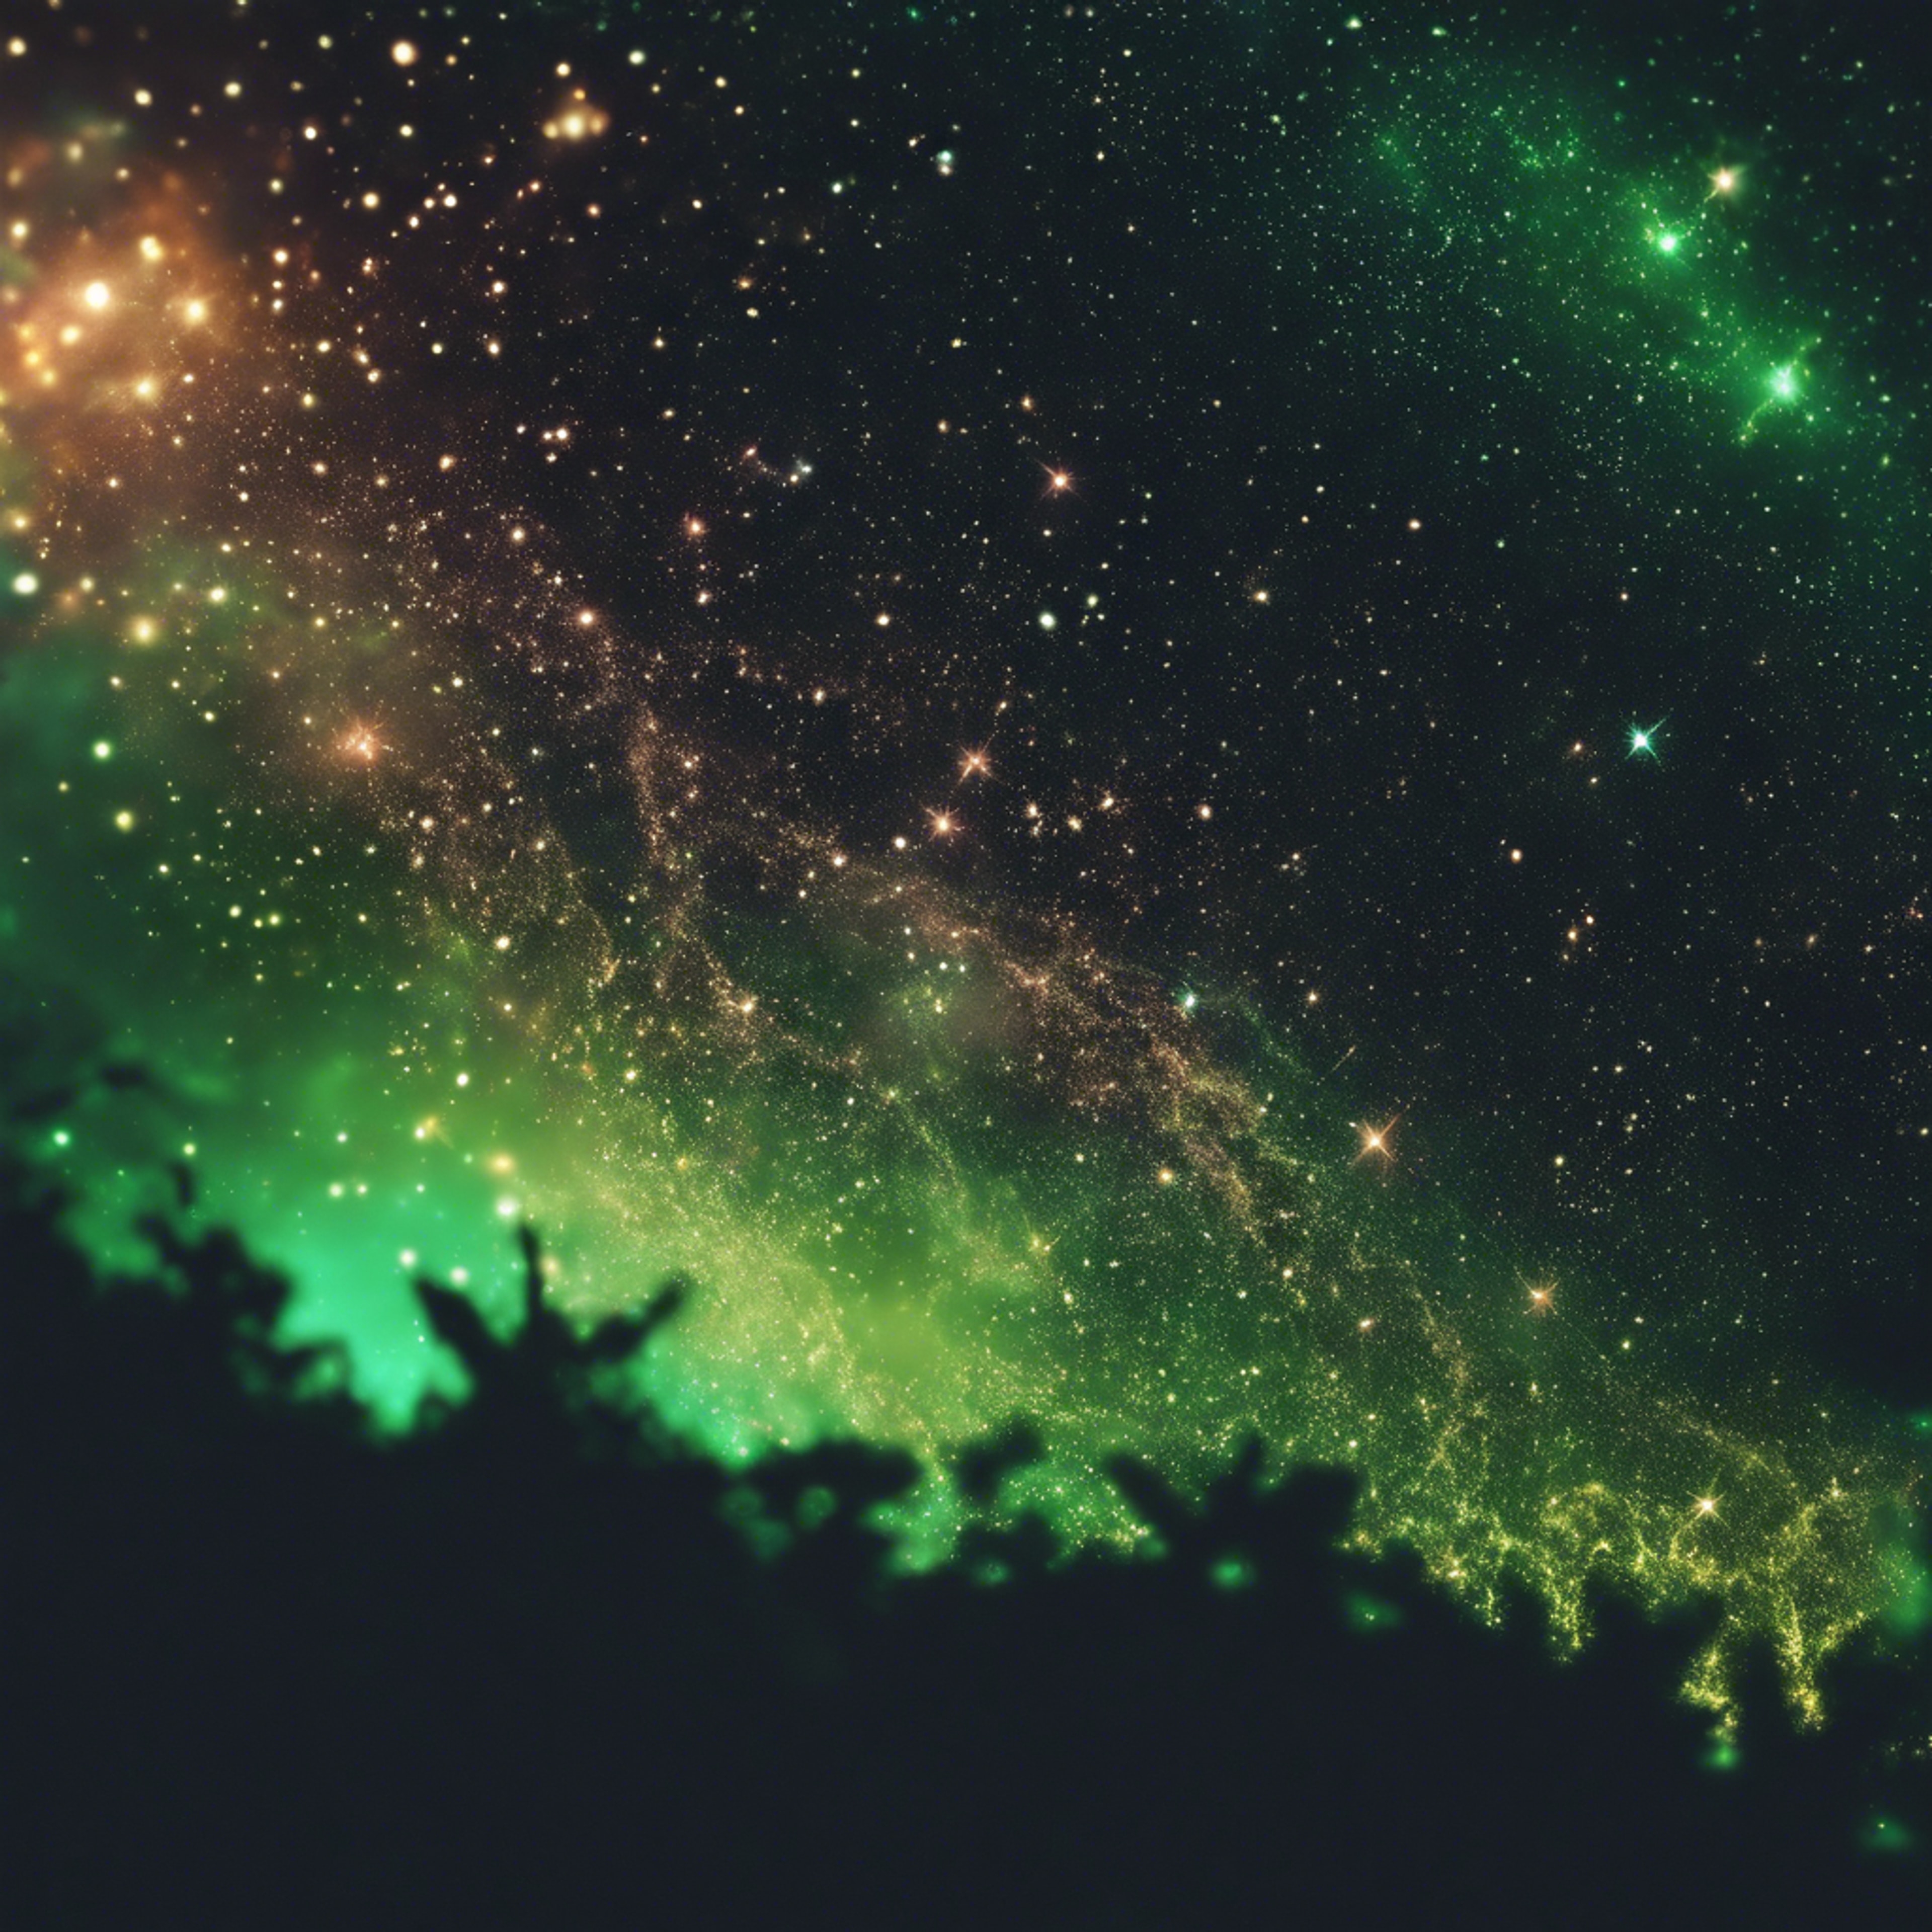 A galaxy seen from the edge of the universe, with cool neon green stars sparking in the darkness. 墙纸[23da465cd95e430a971e]